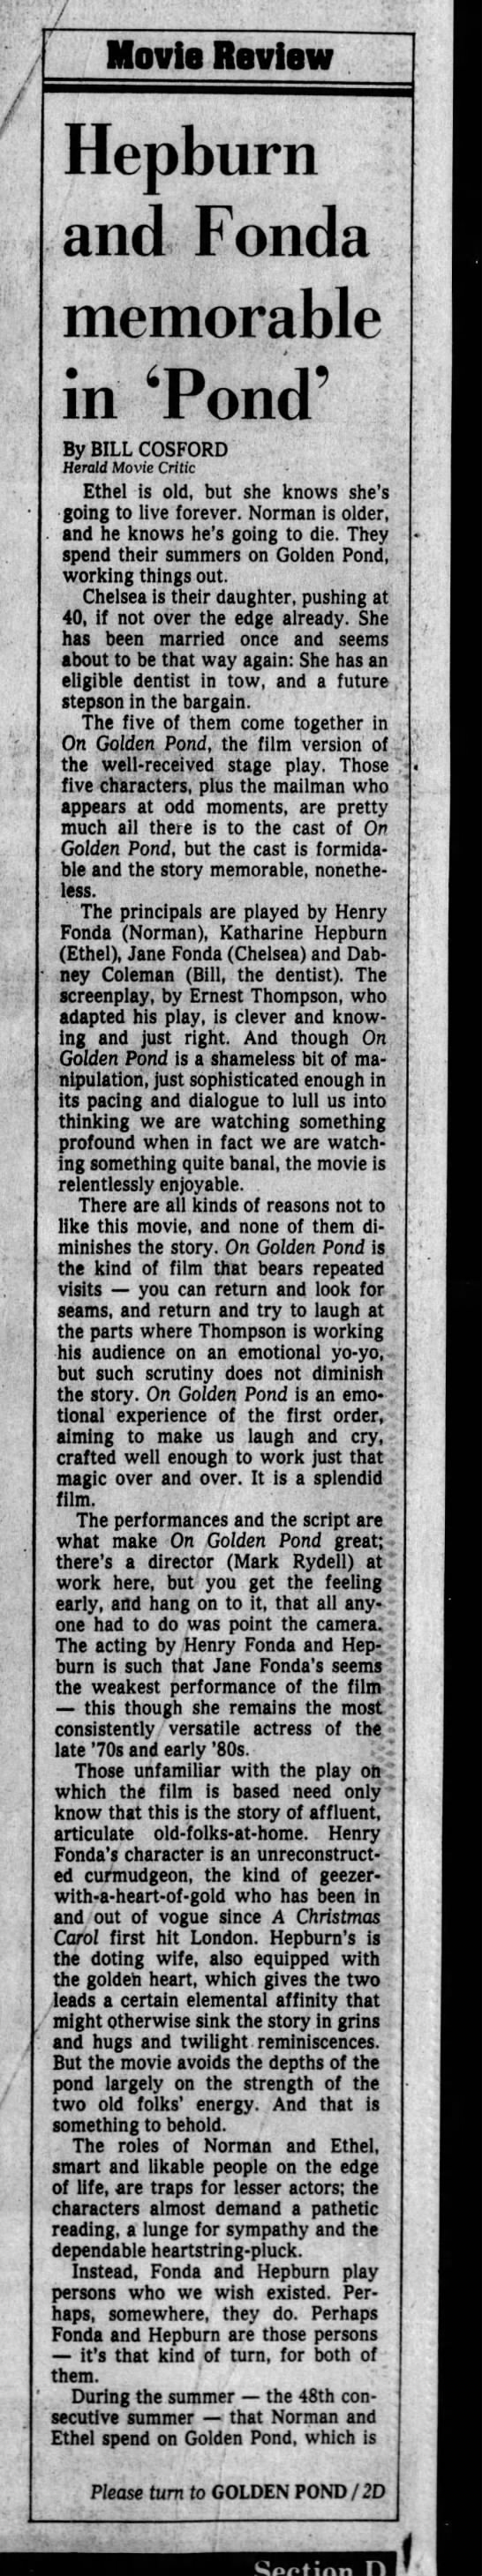 Miami Herald On Golden Pond review* - 